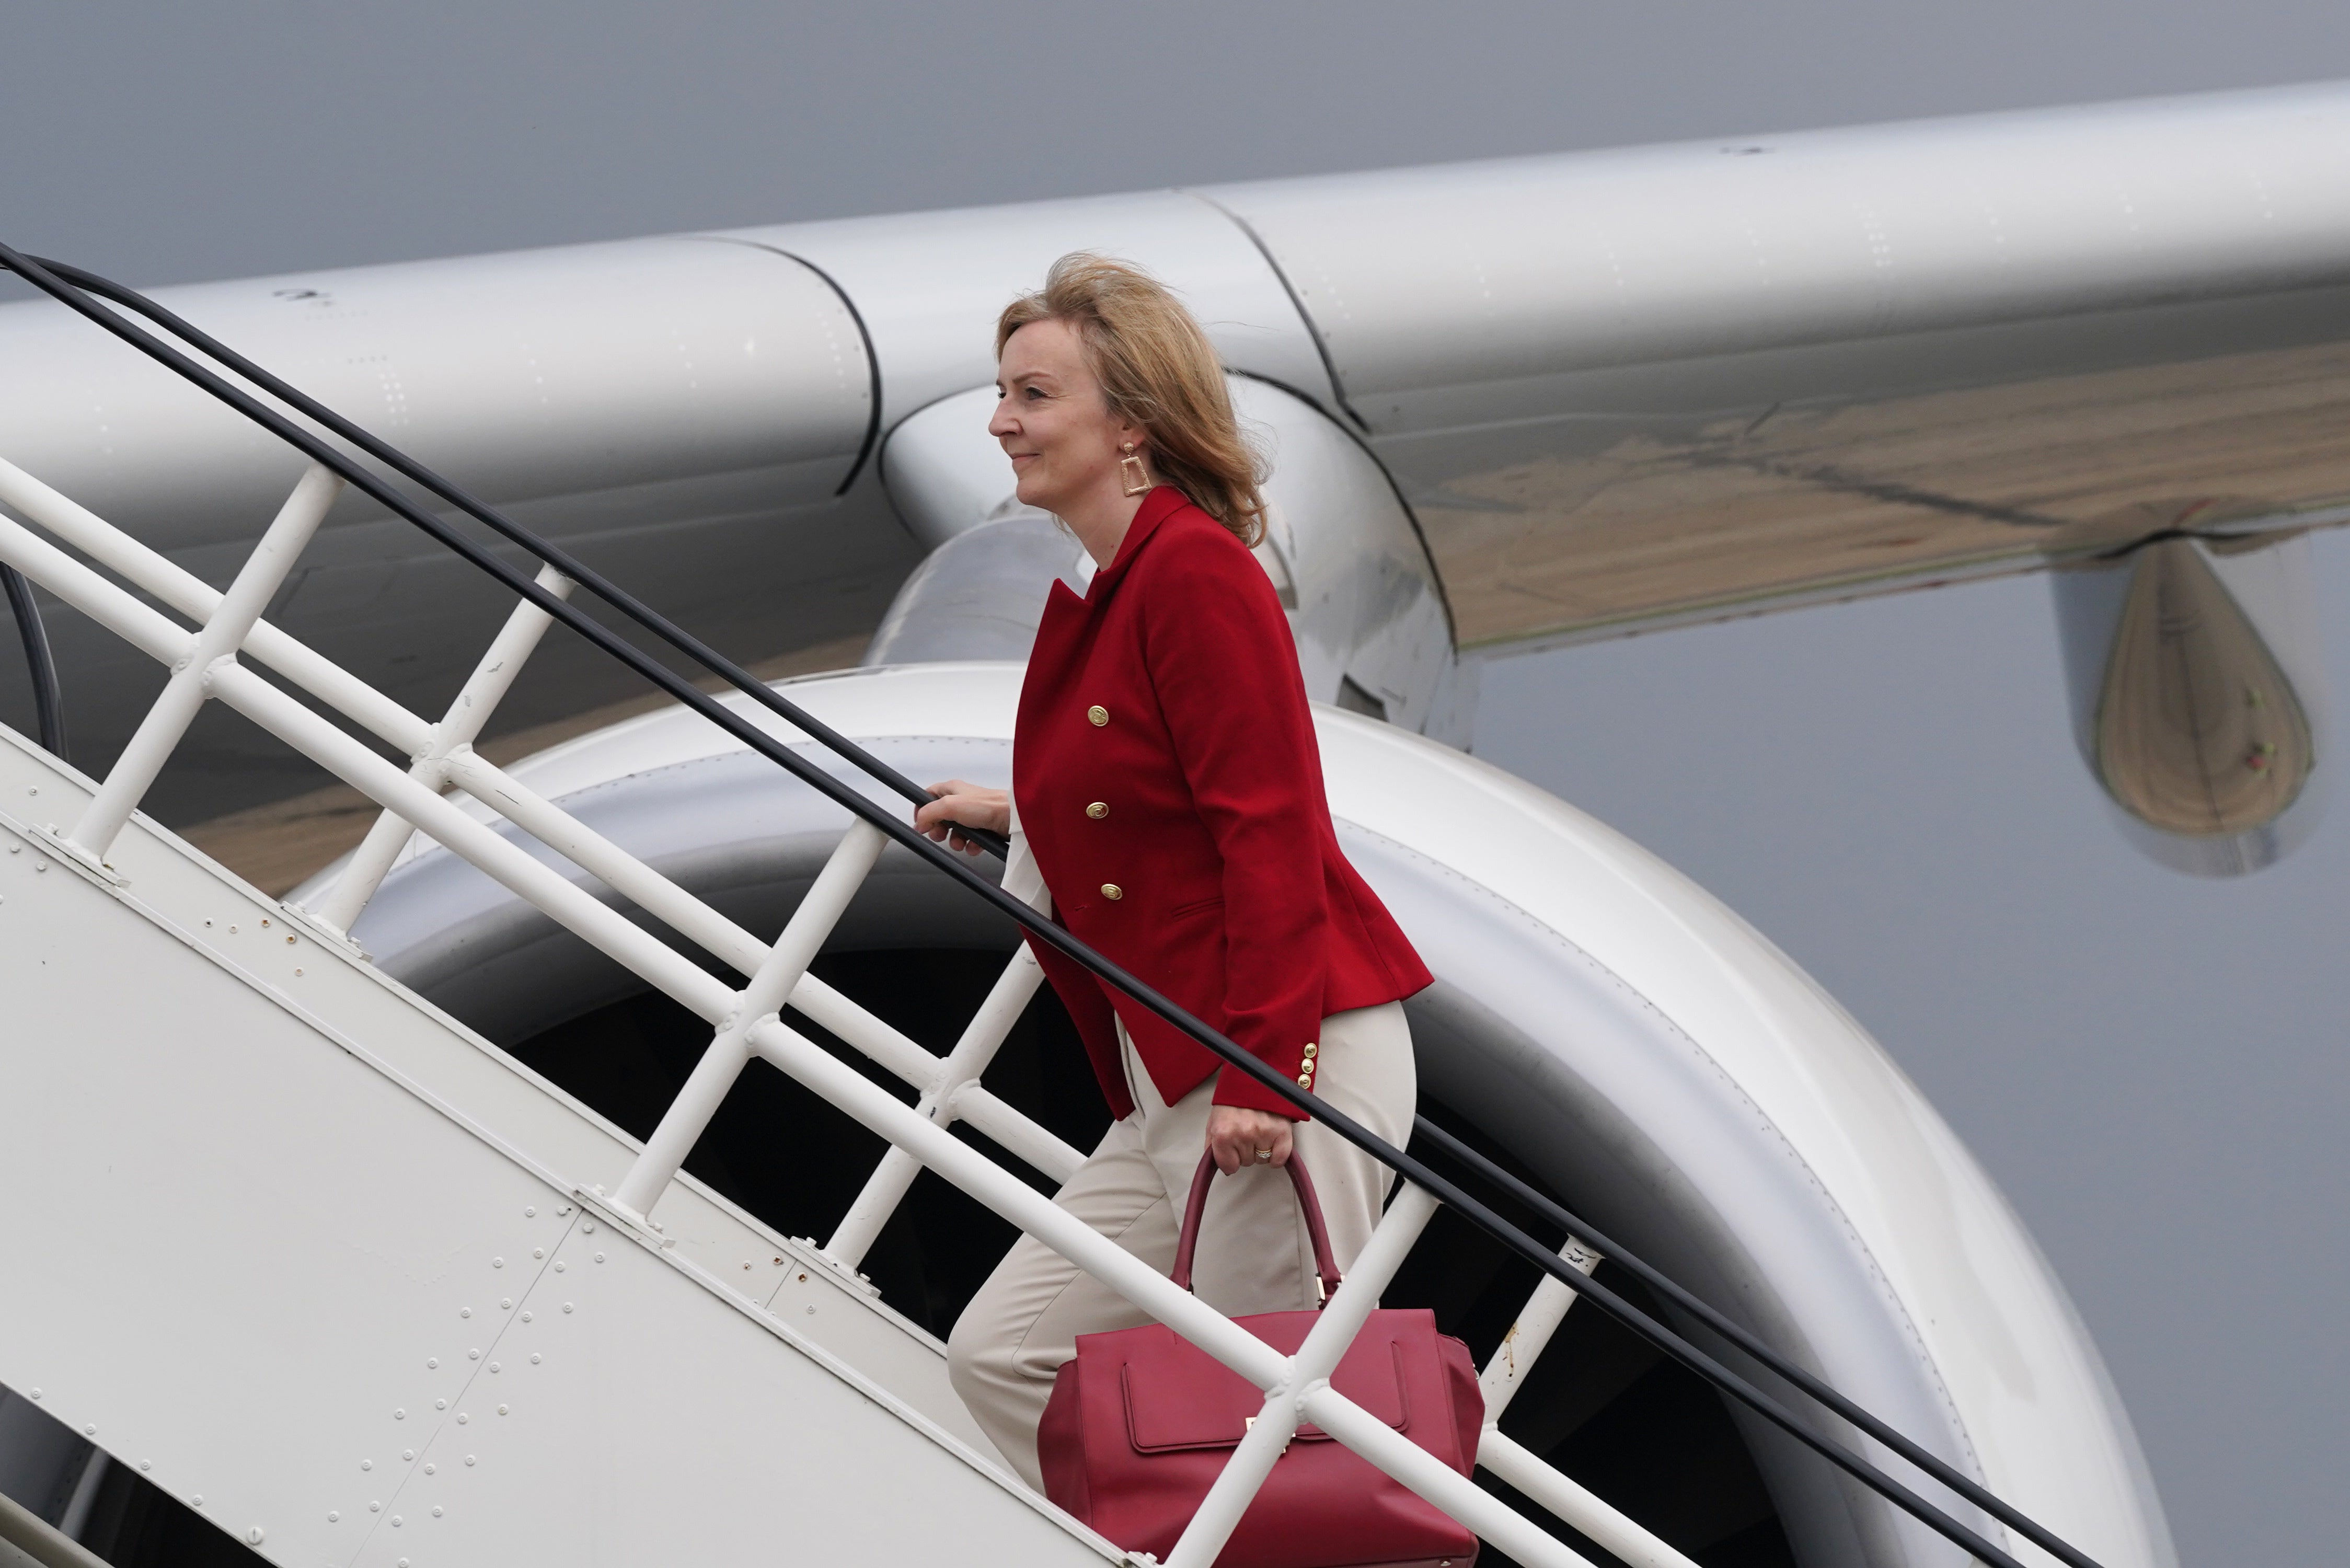 Foreign secretary Liz Truss chartered a government plane for her trip to Australia, rather than use commercial flights